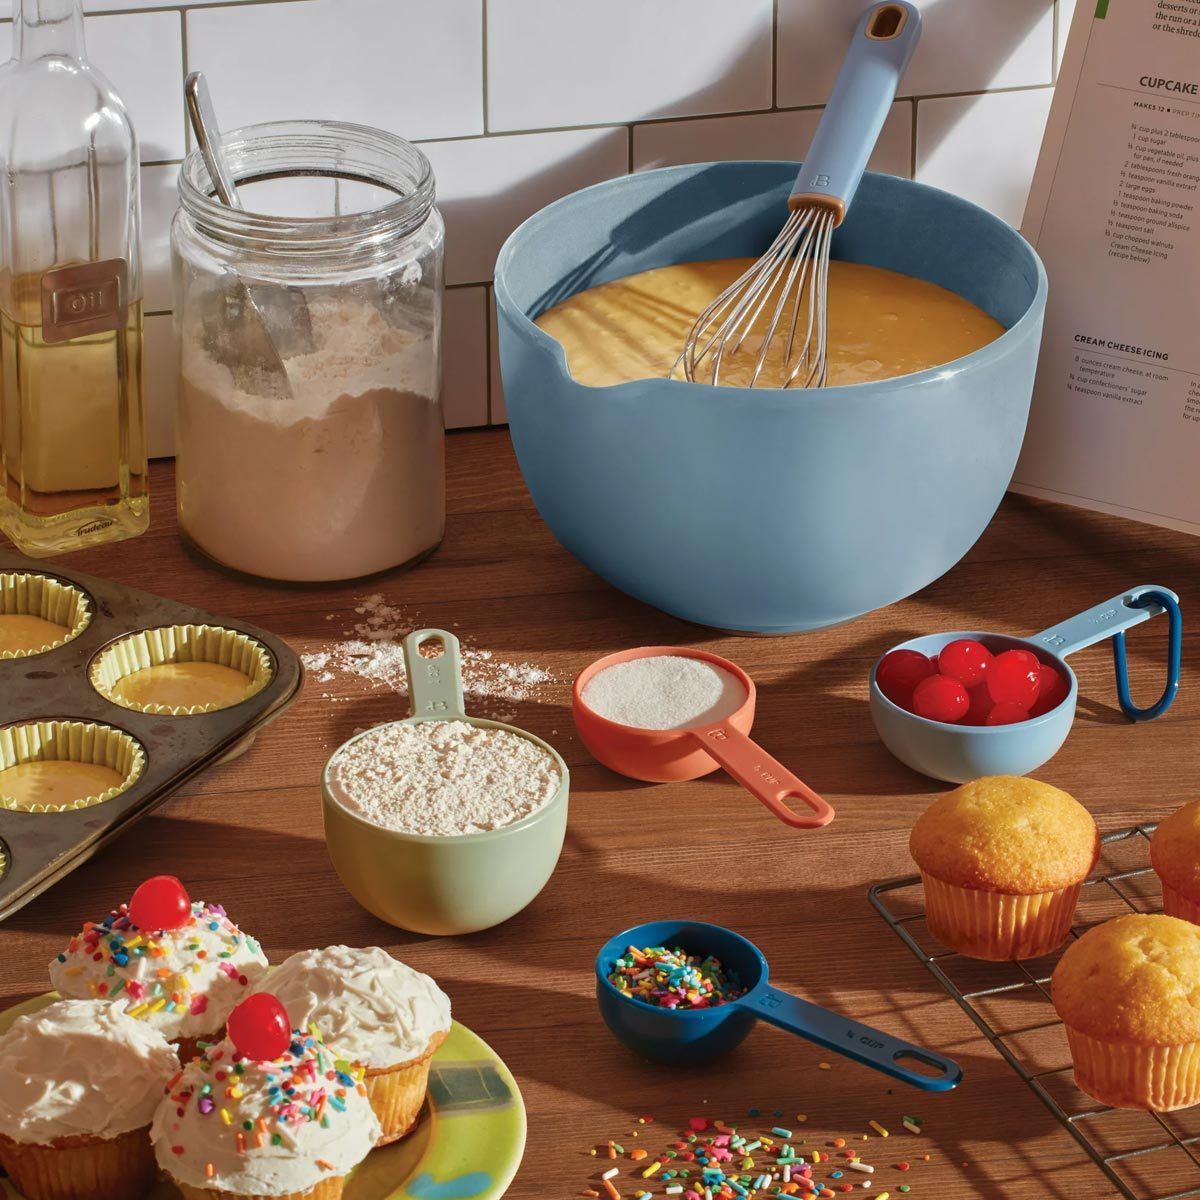 The 38 Best Gifts for Bakers, Whether They're Into Making